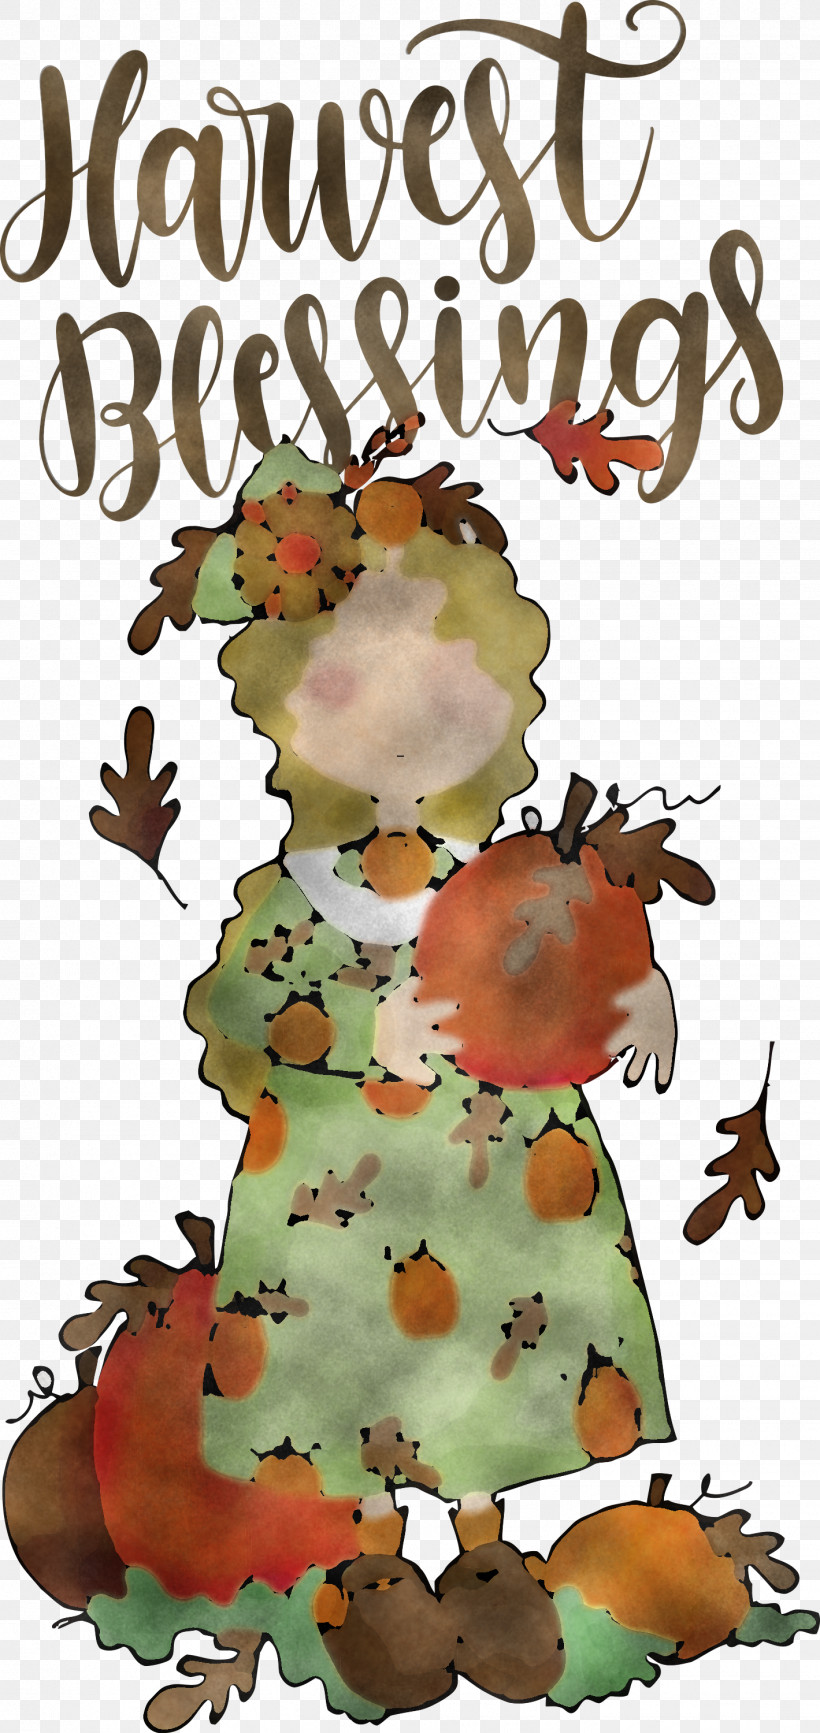 Harvest Blessings Thanksgiving Autumn, PNG, 1419x3000px, Harvest Blessings, Autumn, Meter, Thanksgiving, Torte Download Free